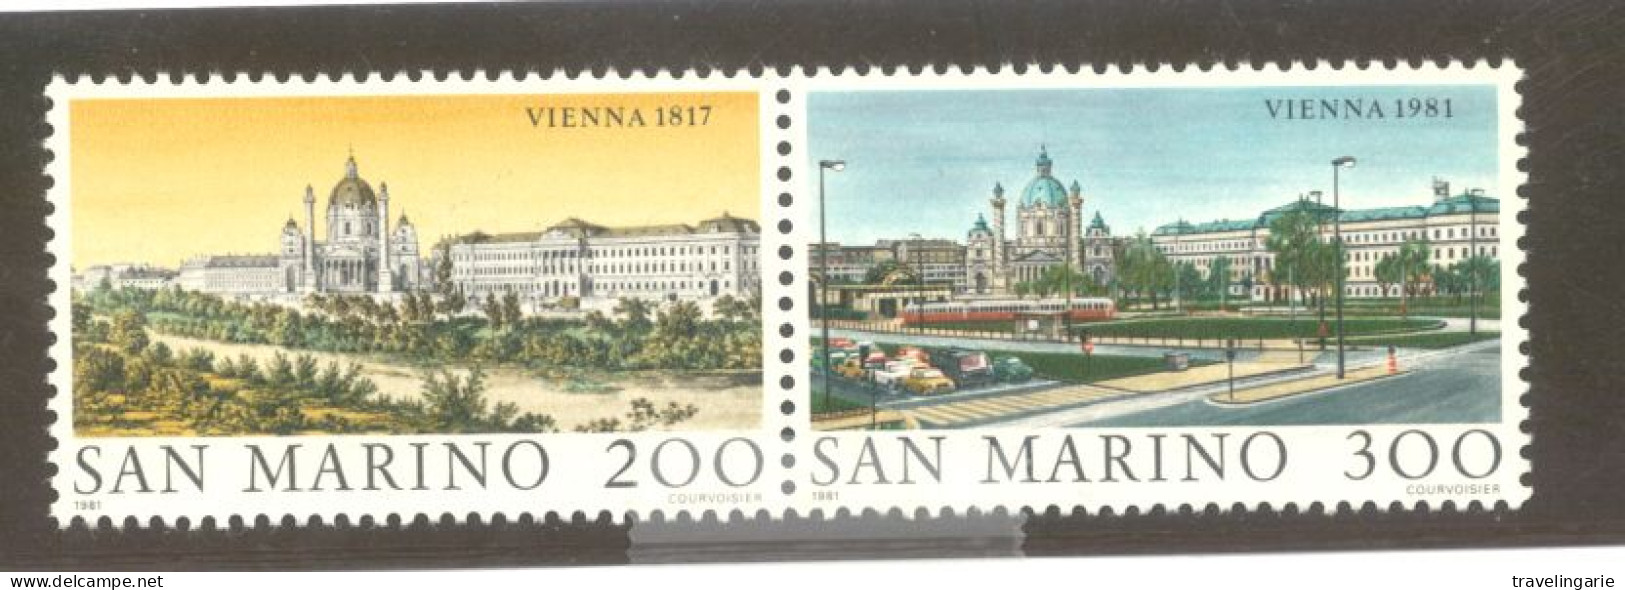 San Marino 1981 Famous Cities Vienna MNH ** Se-tenant Pair - Used Stamps